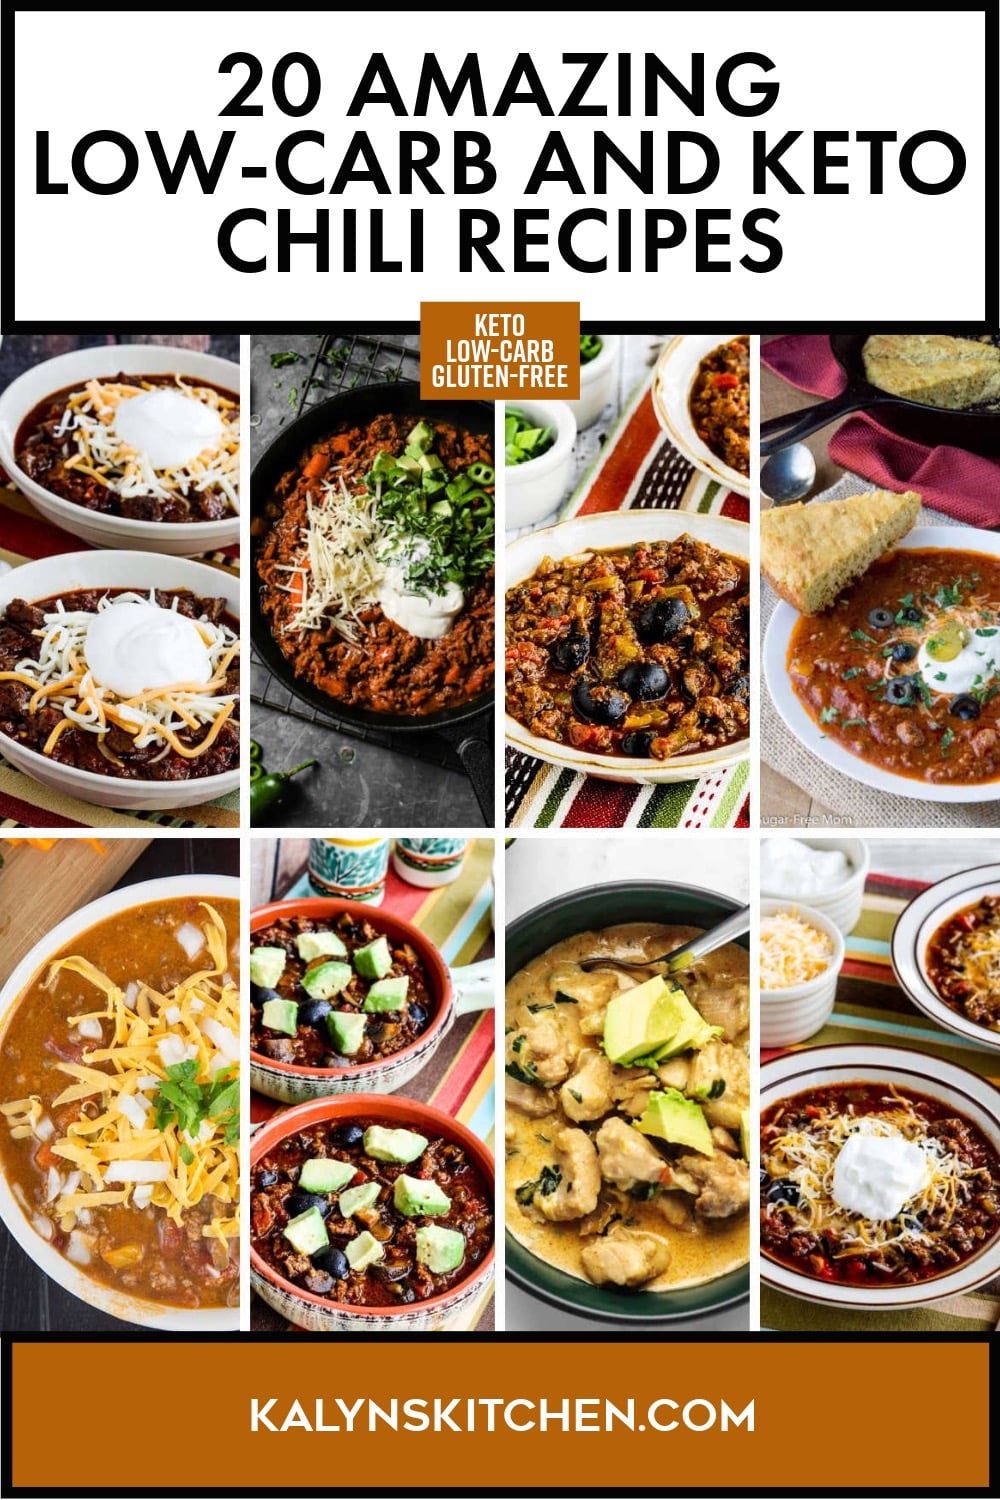 Pinterest image of 20 Amazing Low-Carb and Keto Chili Recipes